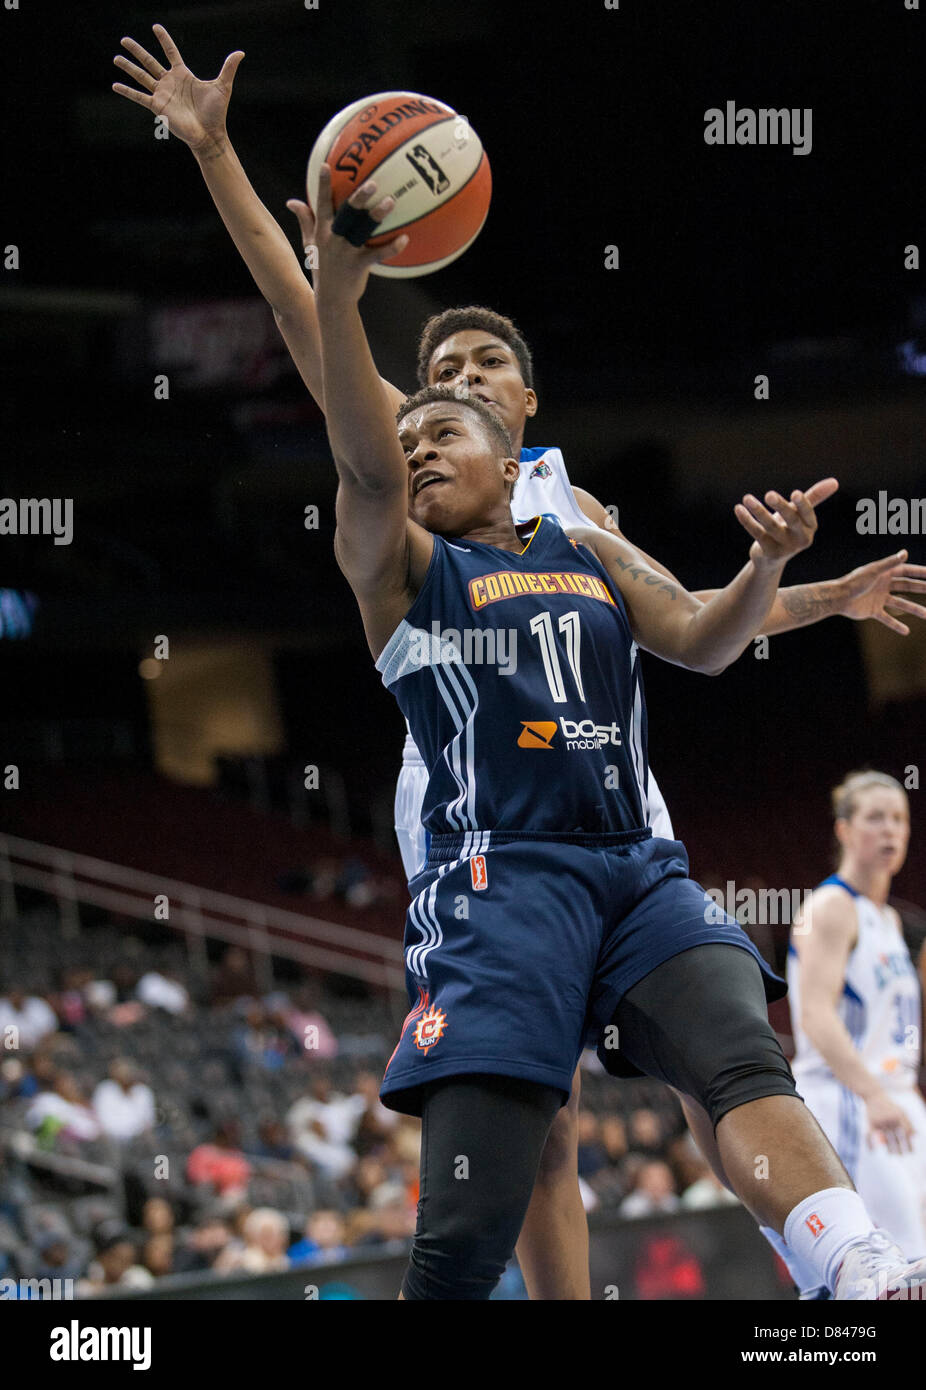 May 18, 2013 - Newark, New Jersey, U.S. - Sun's guard Natasha Lacy #11 penetrates toward the basket as Liberty's guard Kamiko Williams #4 defends in the second half during WNBA action at the Prudential Center in Newark, NJ. New York Liberty defeated the Connecticut Sun 78-67. Stock Photo